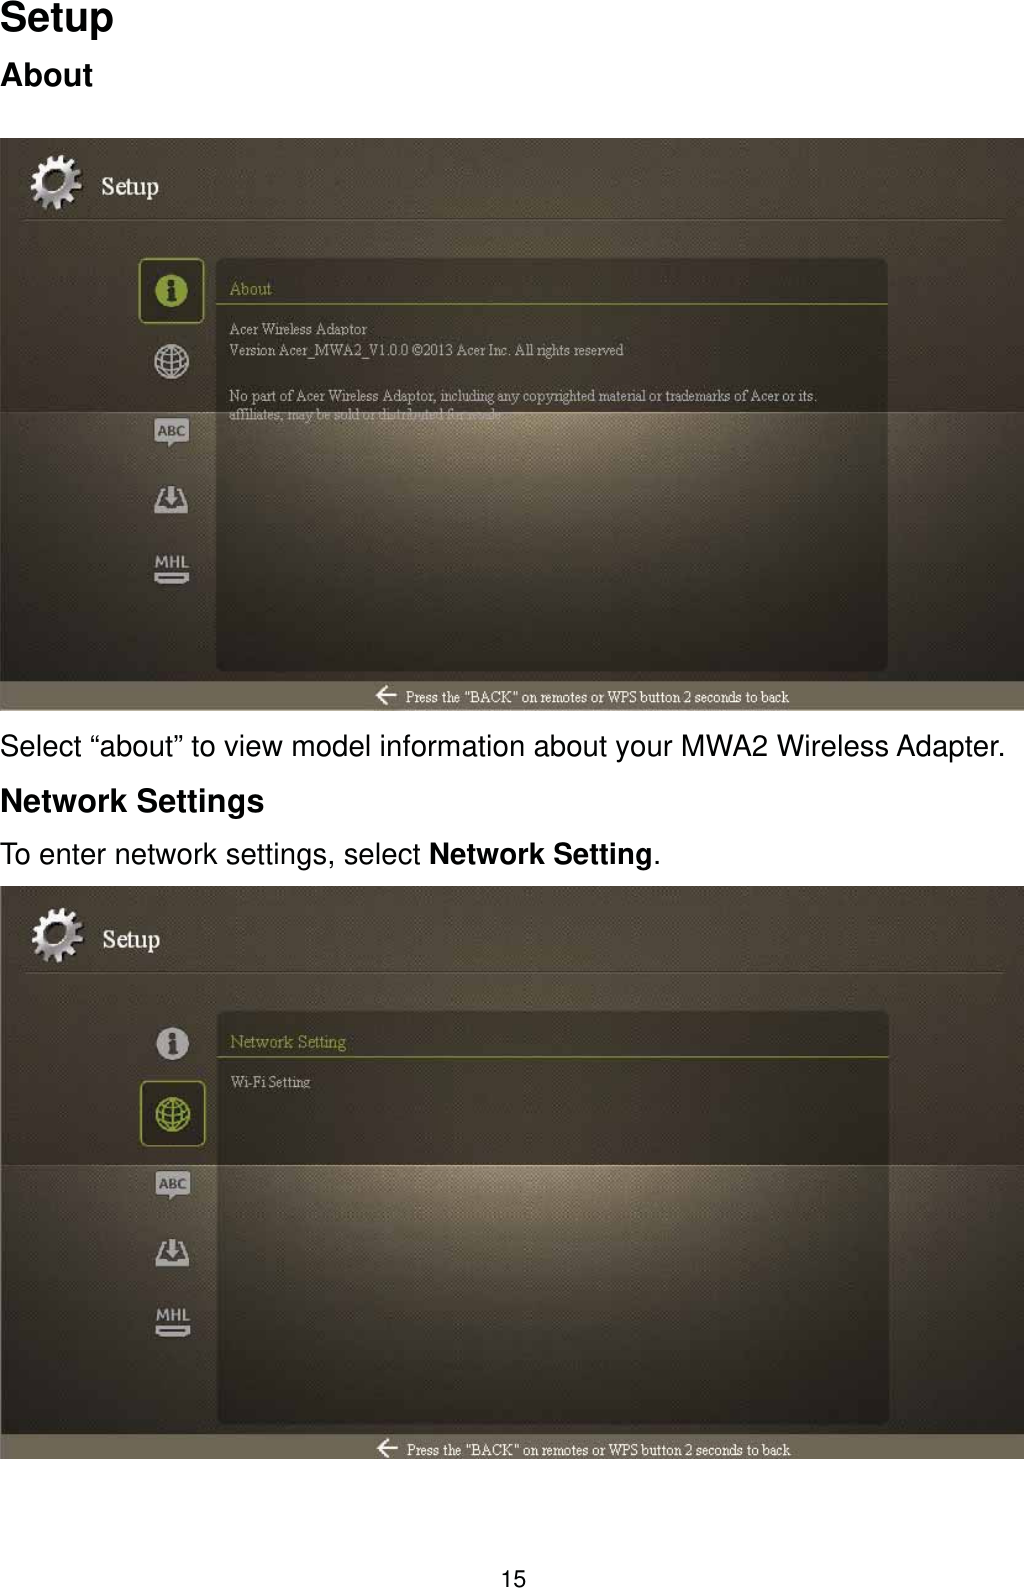 15SetupAboutSelect “about” to view model information about your MWA2 Wireless Adapter. Network SettingsTo enter network settings, select Network Setting.